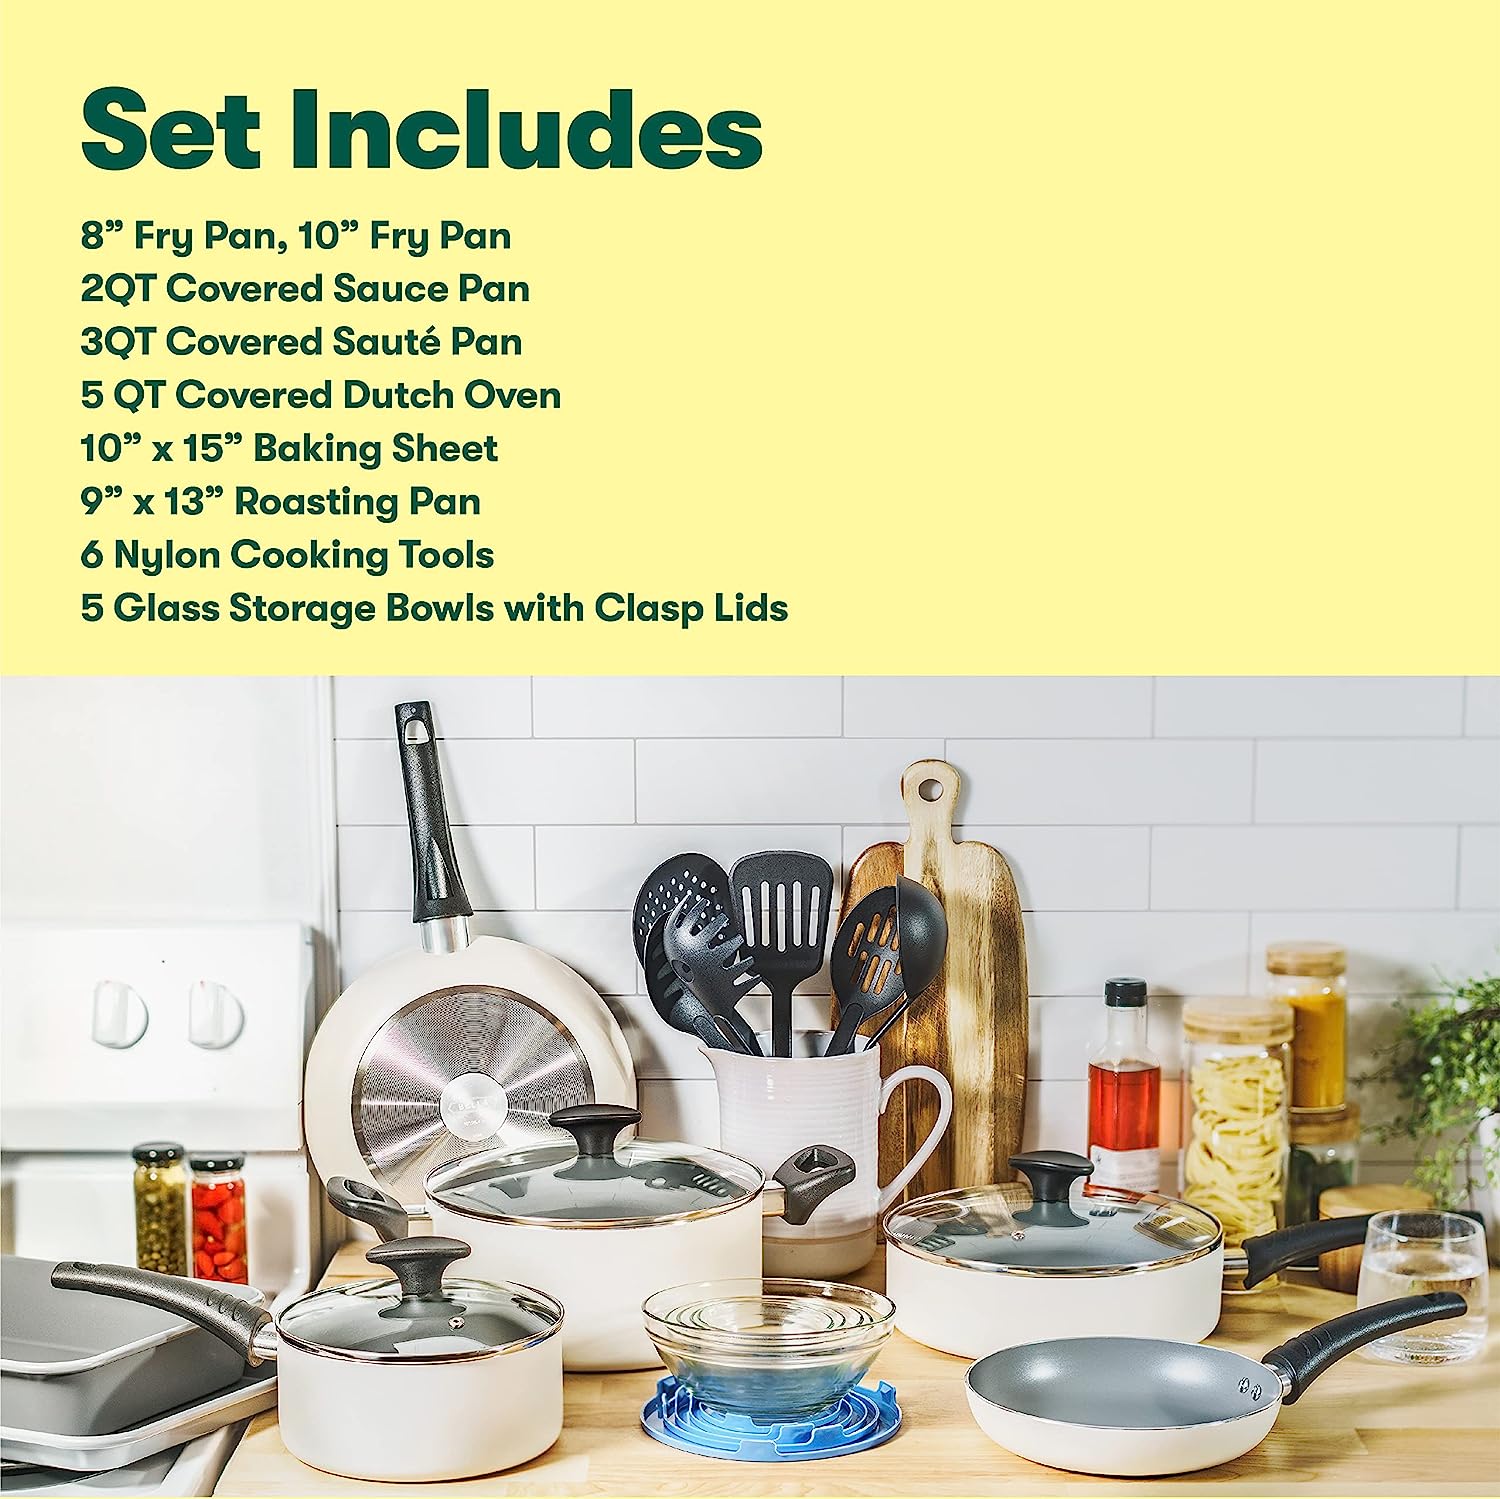 https://bigbigmart.com/wp-content/uploads/2023/06/BELLA-Nonstick-Cookware-Set-with-Glass-Lids-Aluminum-Bakeware-Pots-and-Pans-Storage-Bowls-Utensils-Compatible-with-All-Stovetops-21-Piece-White2.jpg